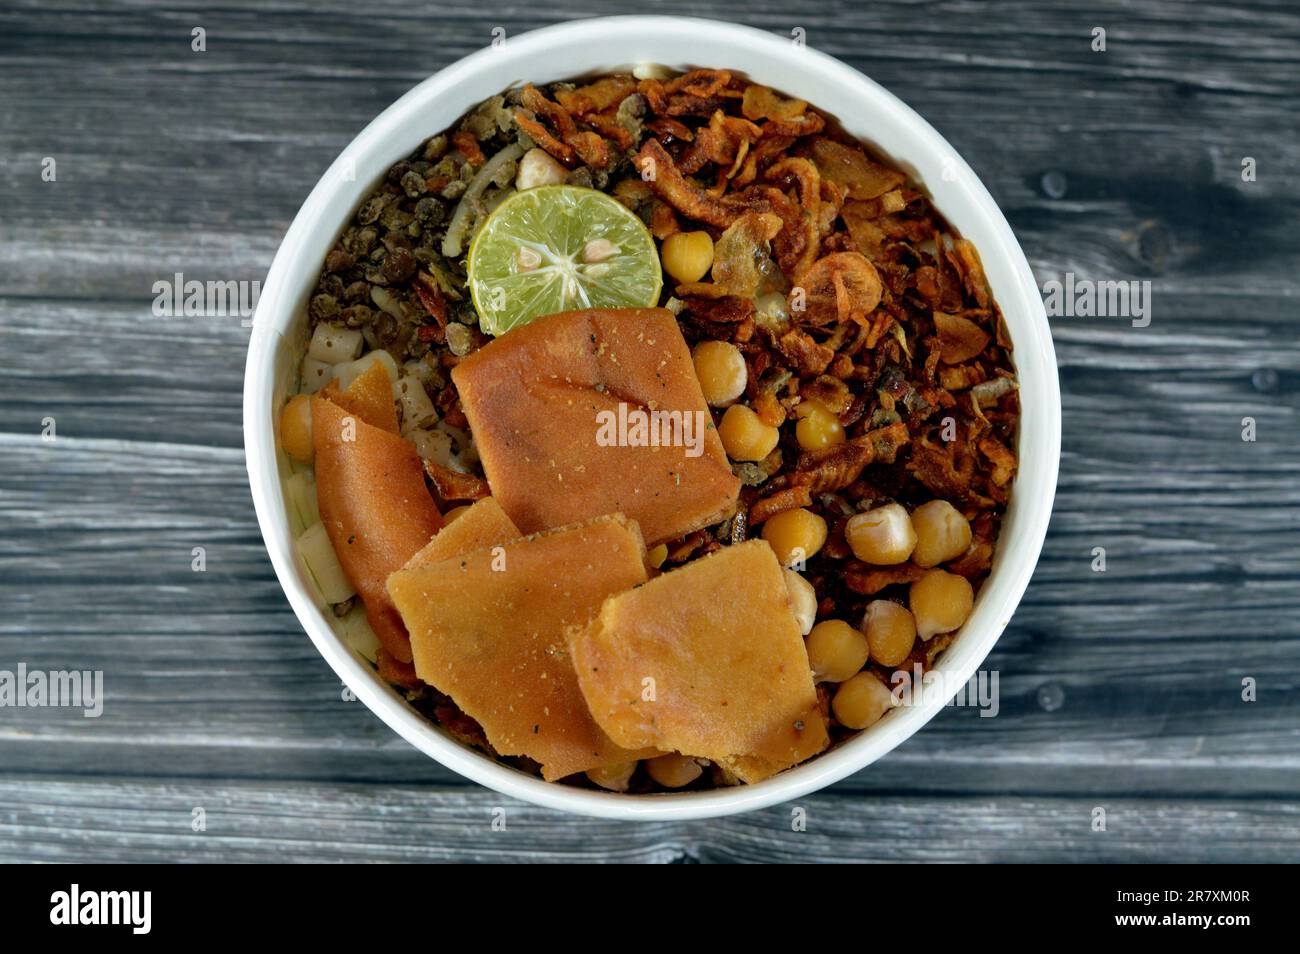 Egyptian cuisine of Koshary, a popular street food made of rice, macaroni, spaghetti and lentils mixed together topped with pieces of toast bread, gar Stock Photo